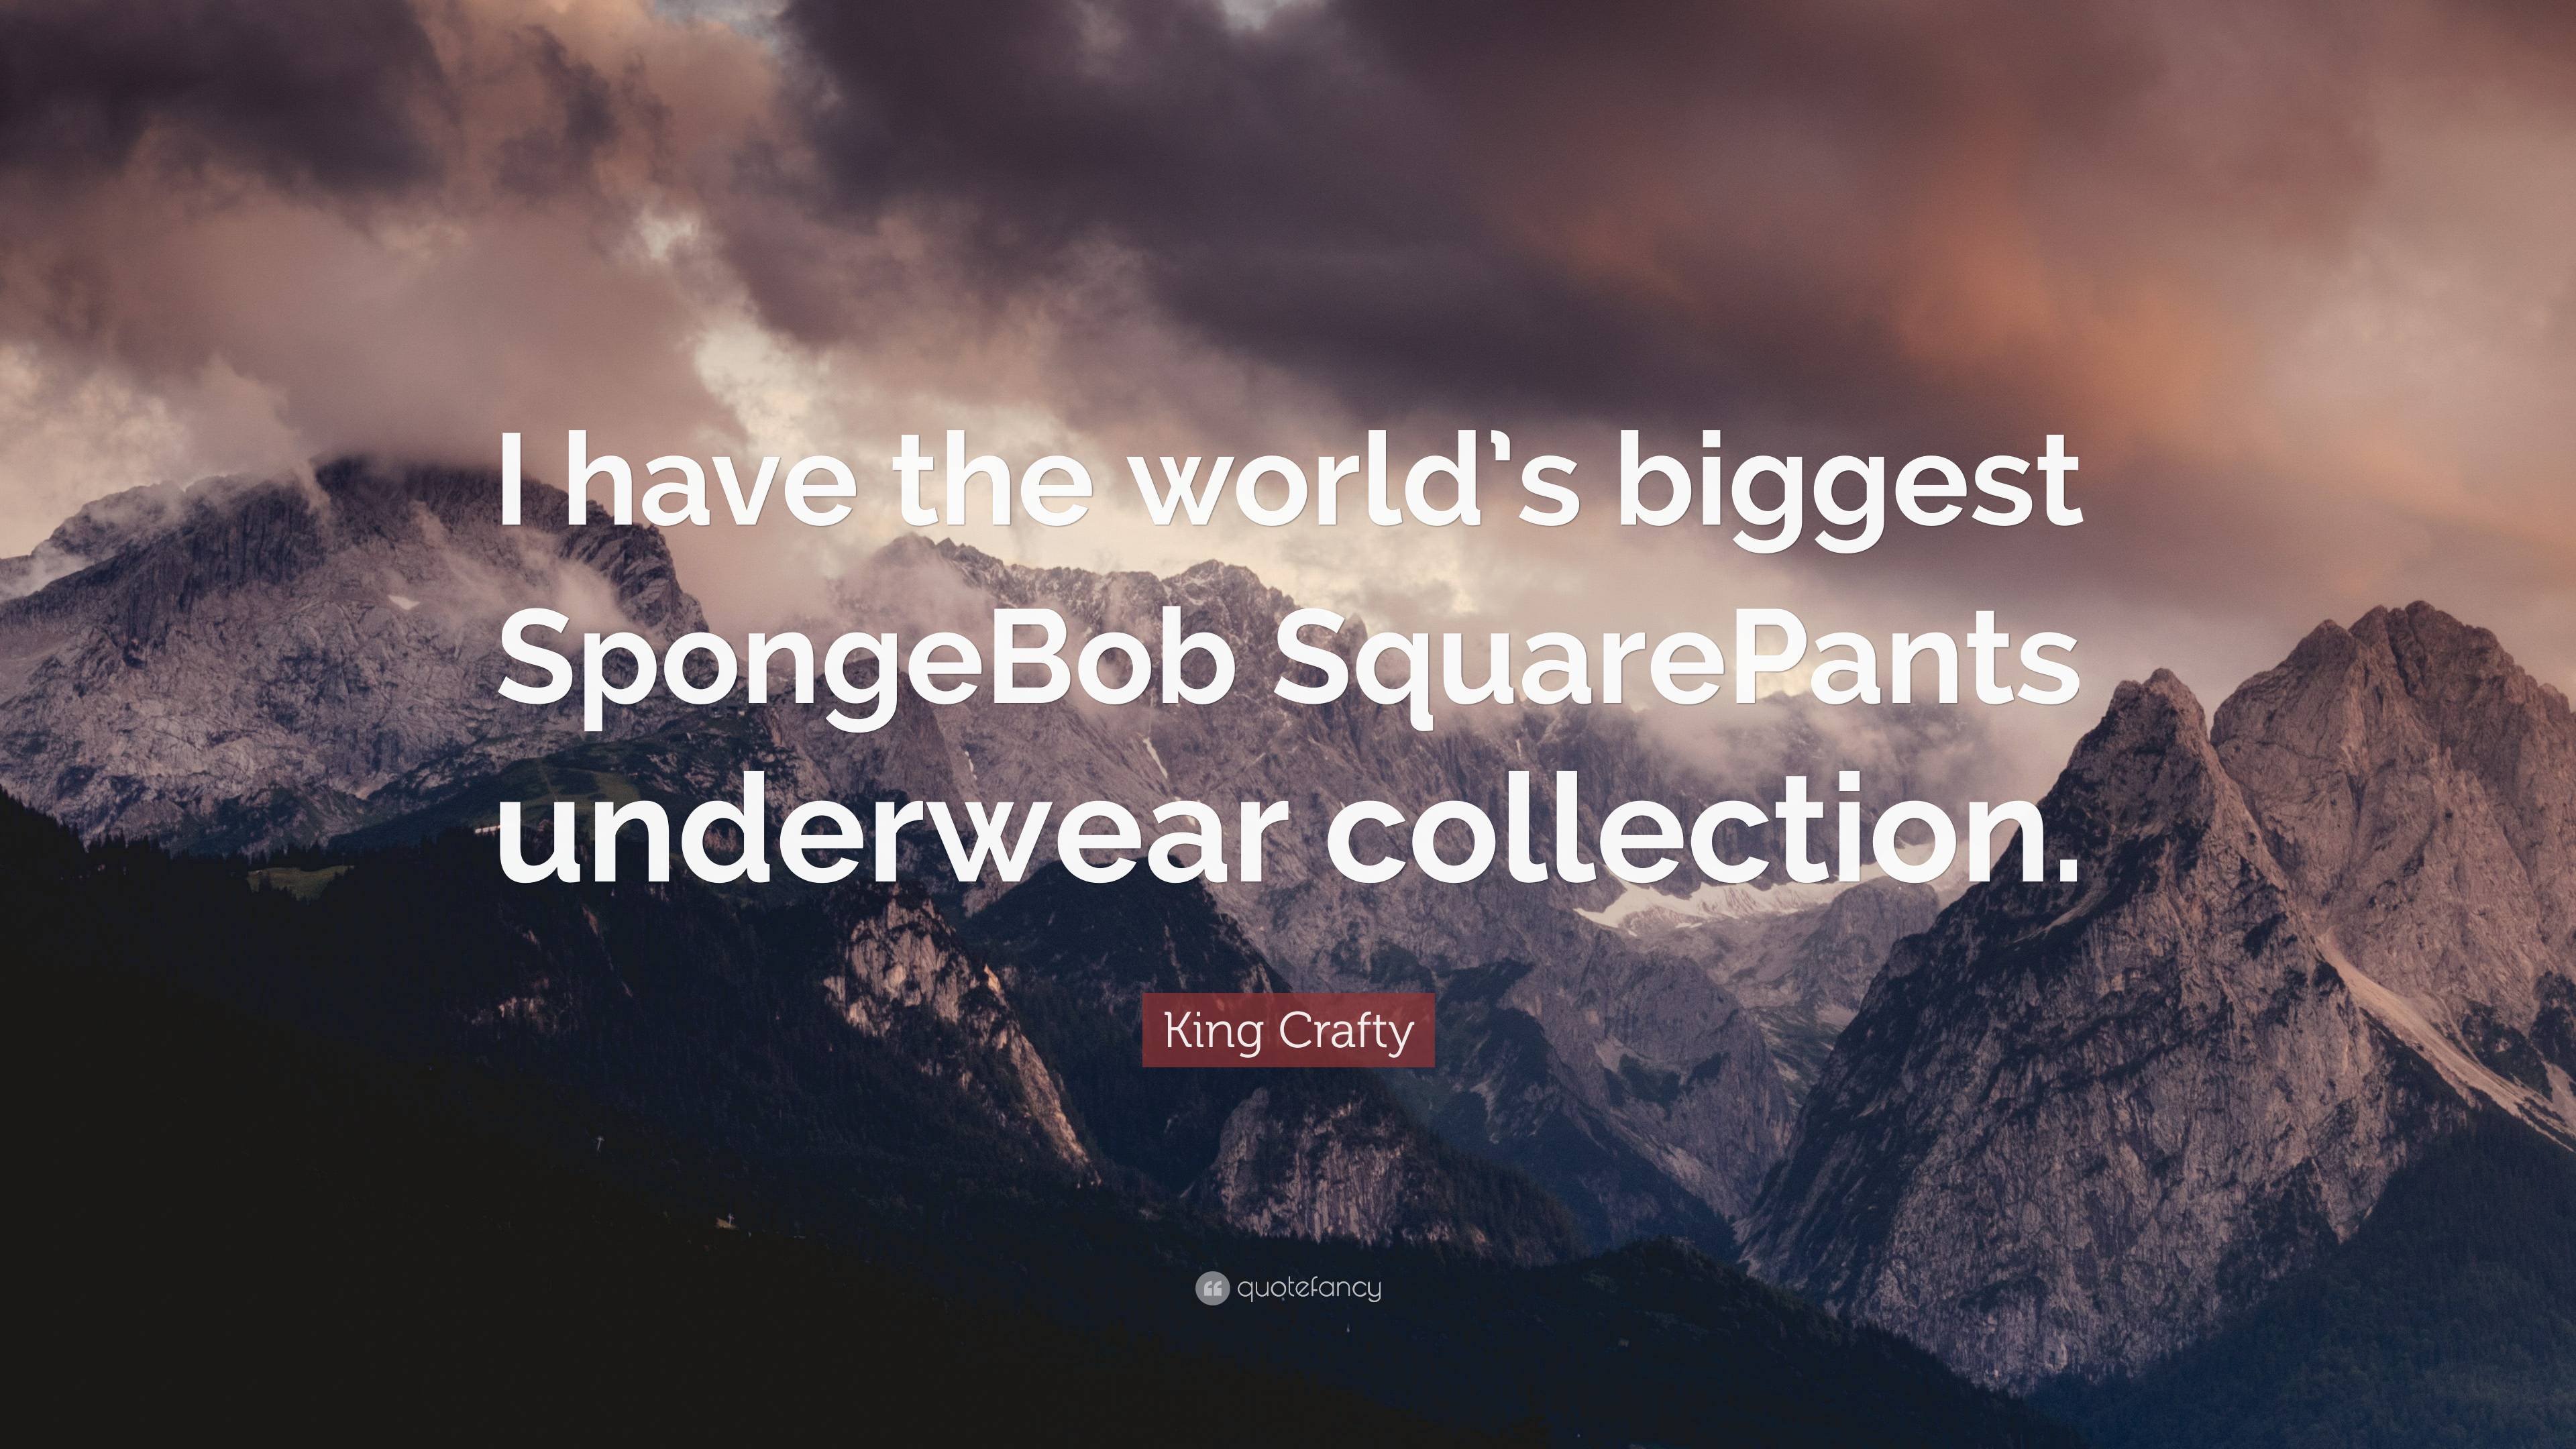 King Crafty Quote: “I have the world's biggest SpongeBob SquarePants  underwear collection.”